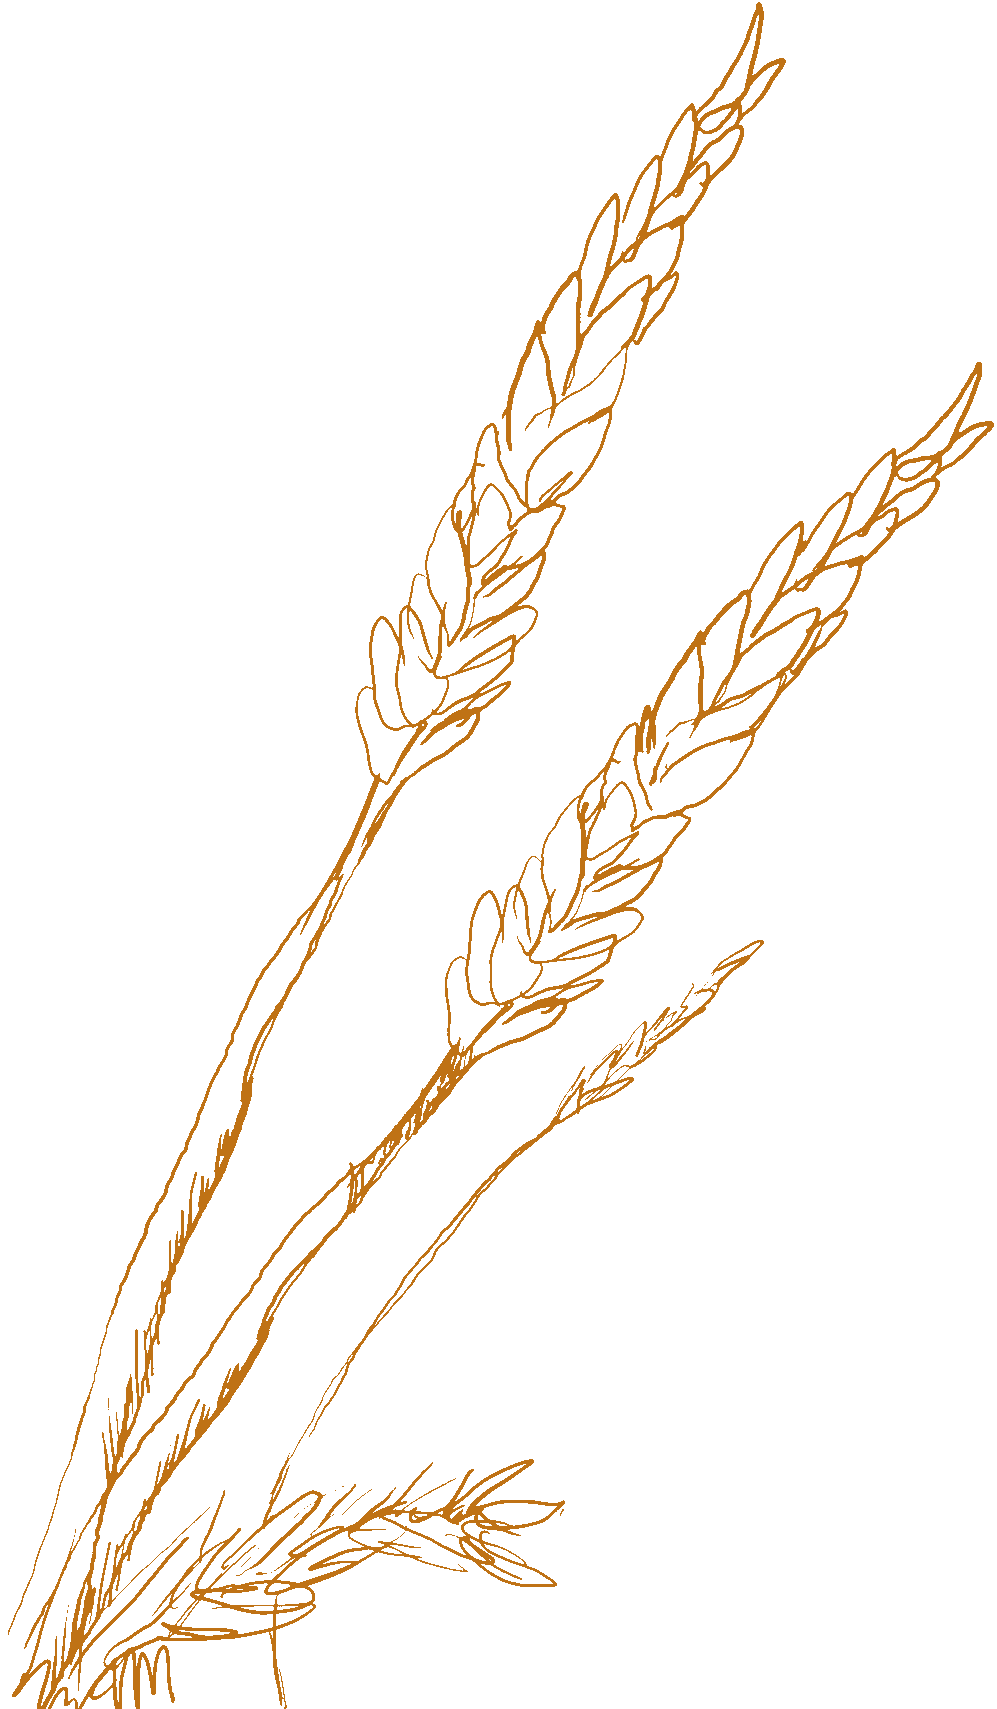 Illustration of a stalk of wheat